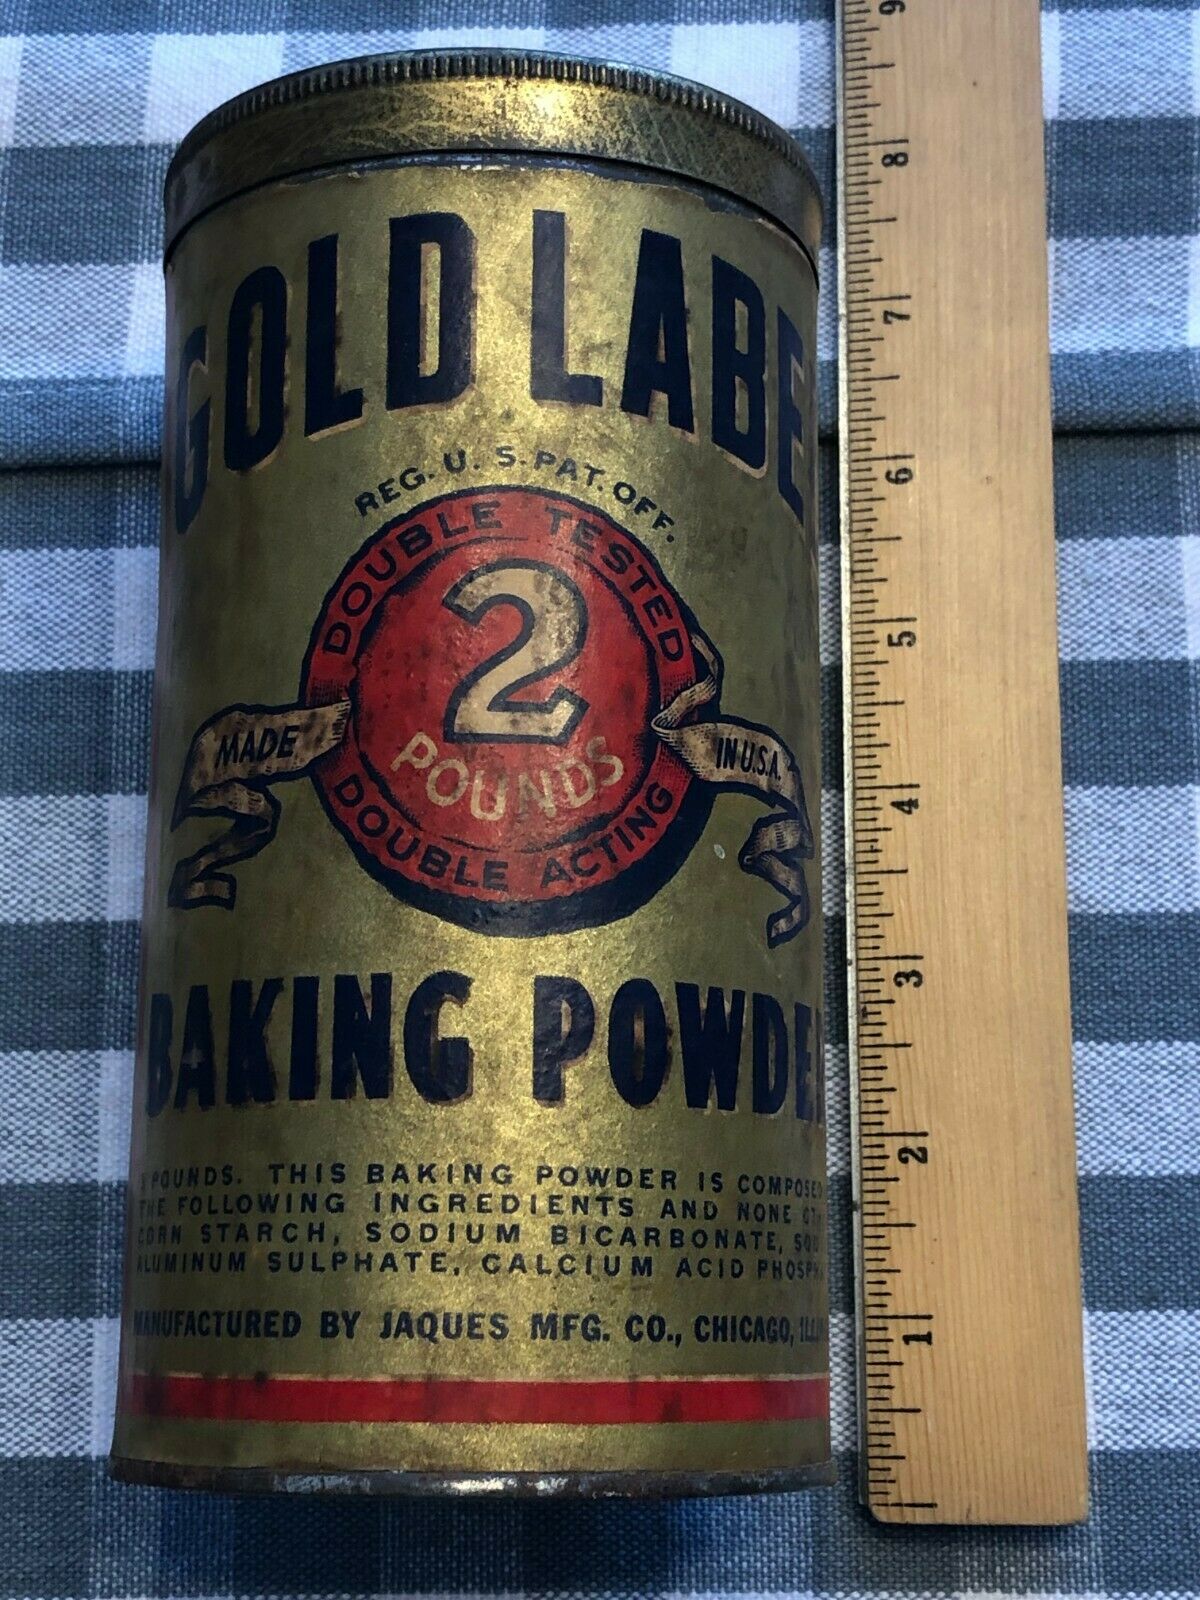 VINTAGE GOLD LABEL BAKING POWDER 2 LB TIN CAN GREAT GRAPHICS VG COND 7" X 3.5"